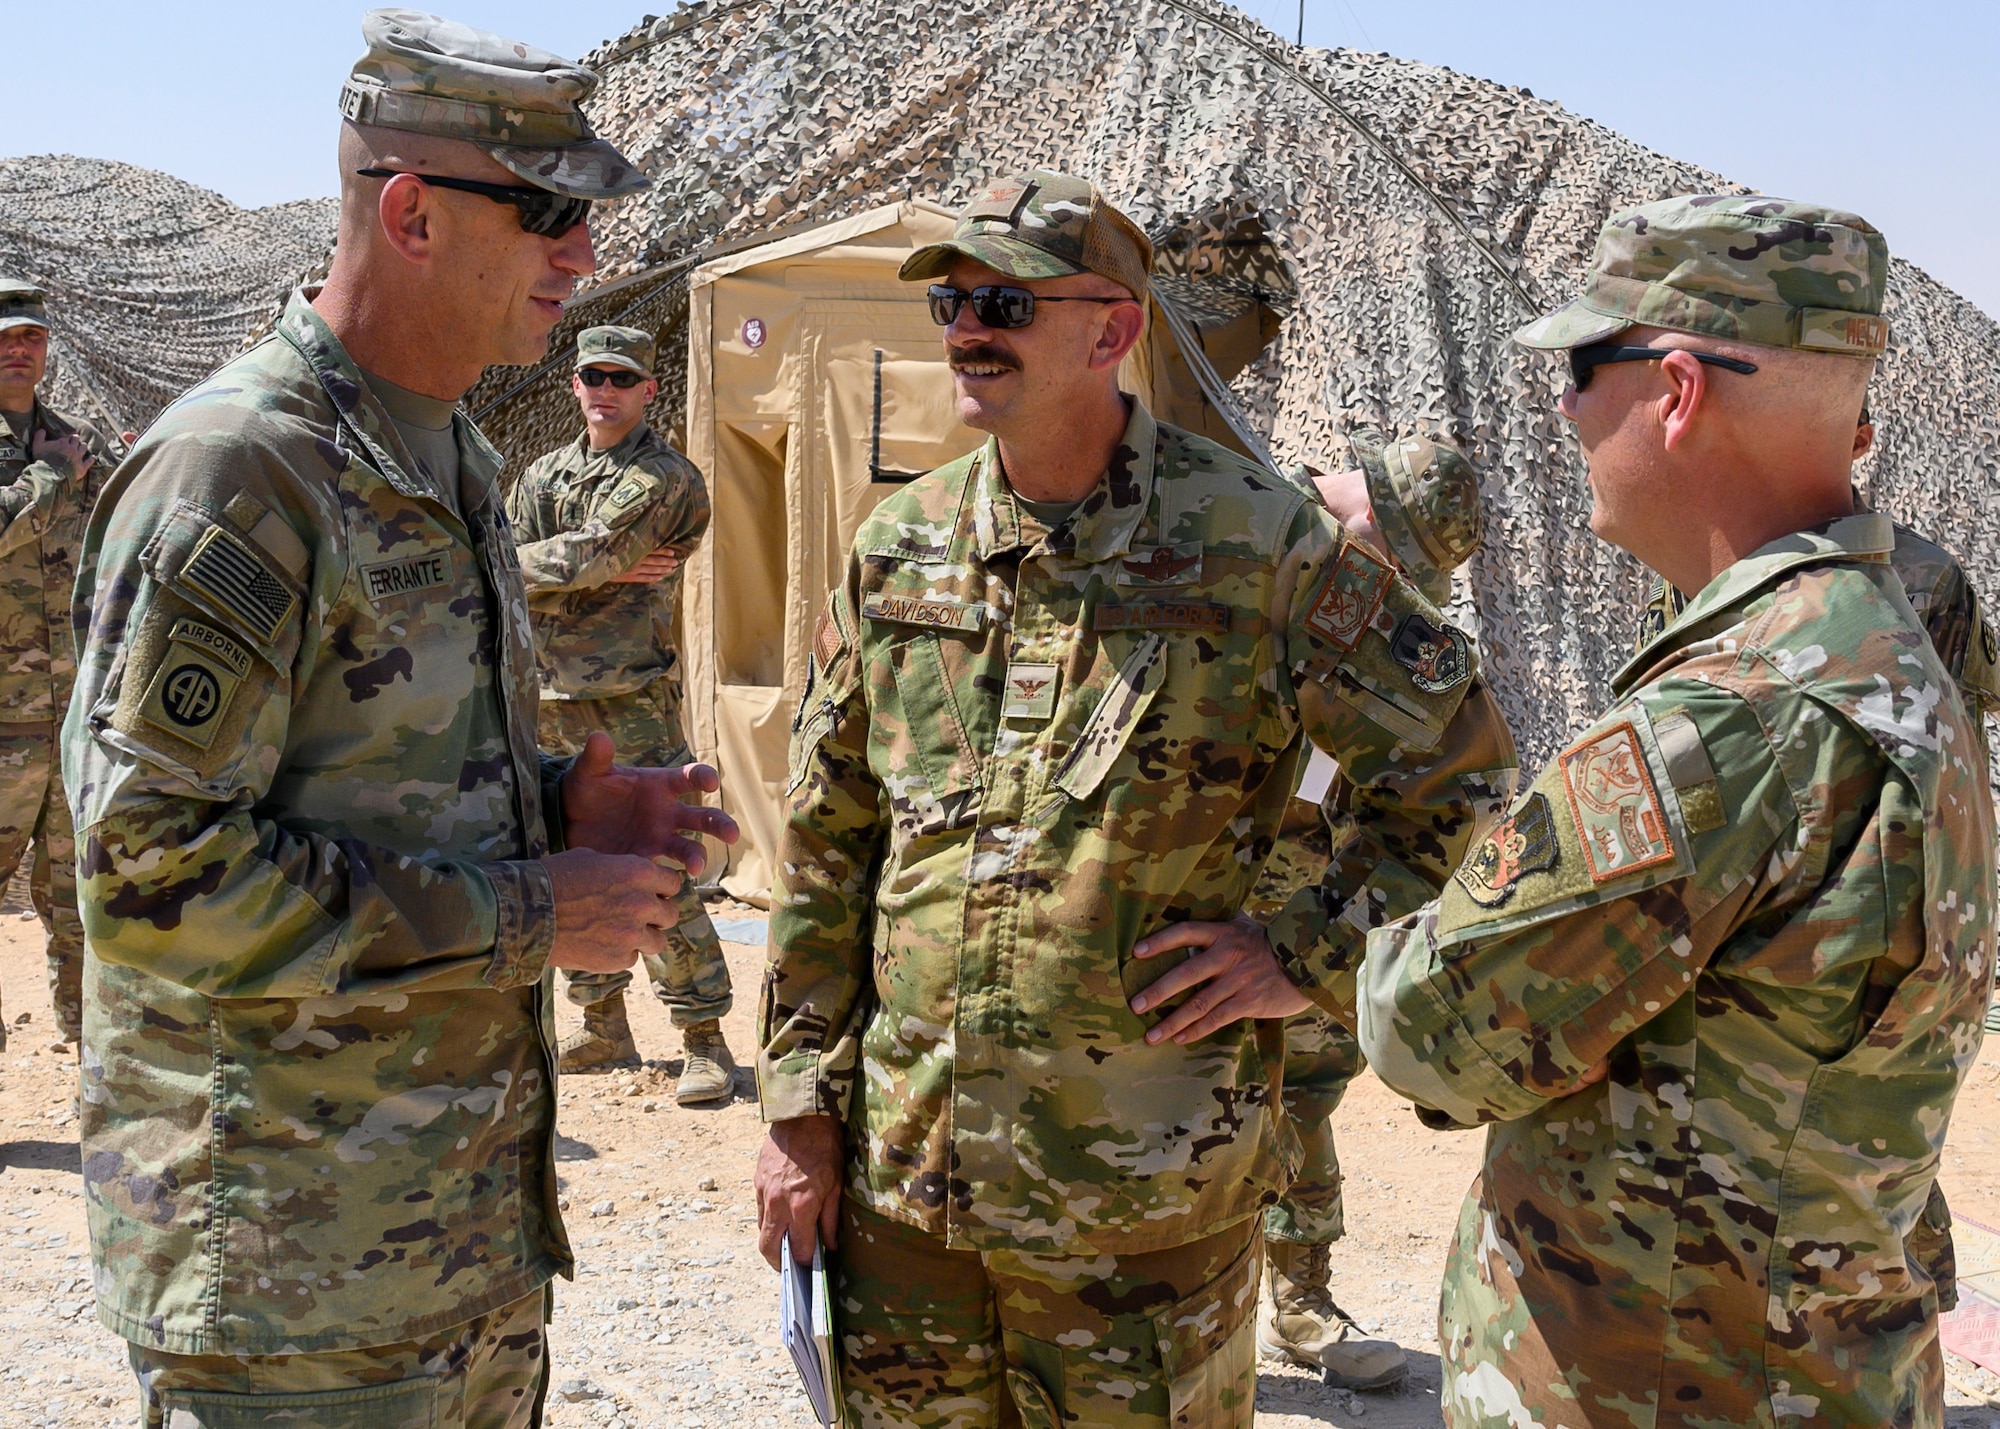 U.S. Army Sgt. Maj. John Ferrante Jr., U.S. Central Command forward senior enlisted leader in the Kingdom of Saudi Arabia, discusses the capabilities of U.S. personnel at Prince Sultan Air Base, KSA with U.S. Air Force Col. Kevin Davidson, 378th Air Expeditionary Wing vice commander, and Chief Master Sgt. Jackson Helzer, 378th AEW command chief, Oct. 12, 2021. Crimmins visited PSAB for the first time since assuming the SDO role in September, meeting with various personnel to learn about defense efforts and expanding capabilities on base. (U.S. Air Force photo by Senior Airman Samuel Earick)